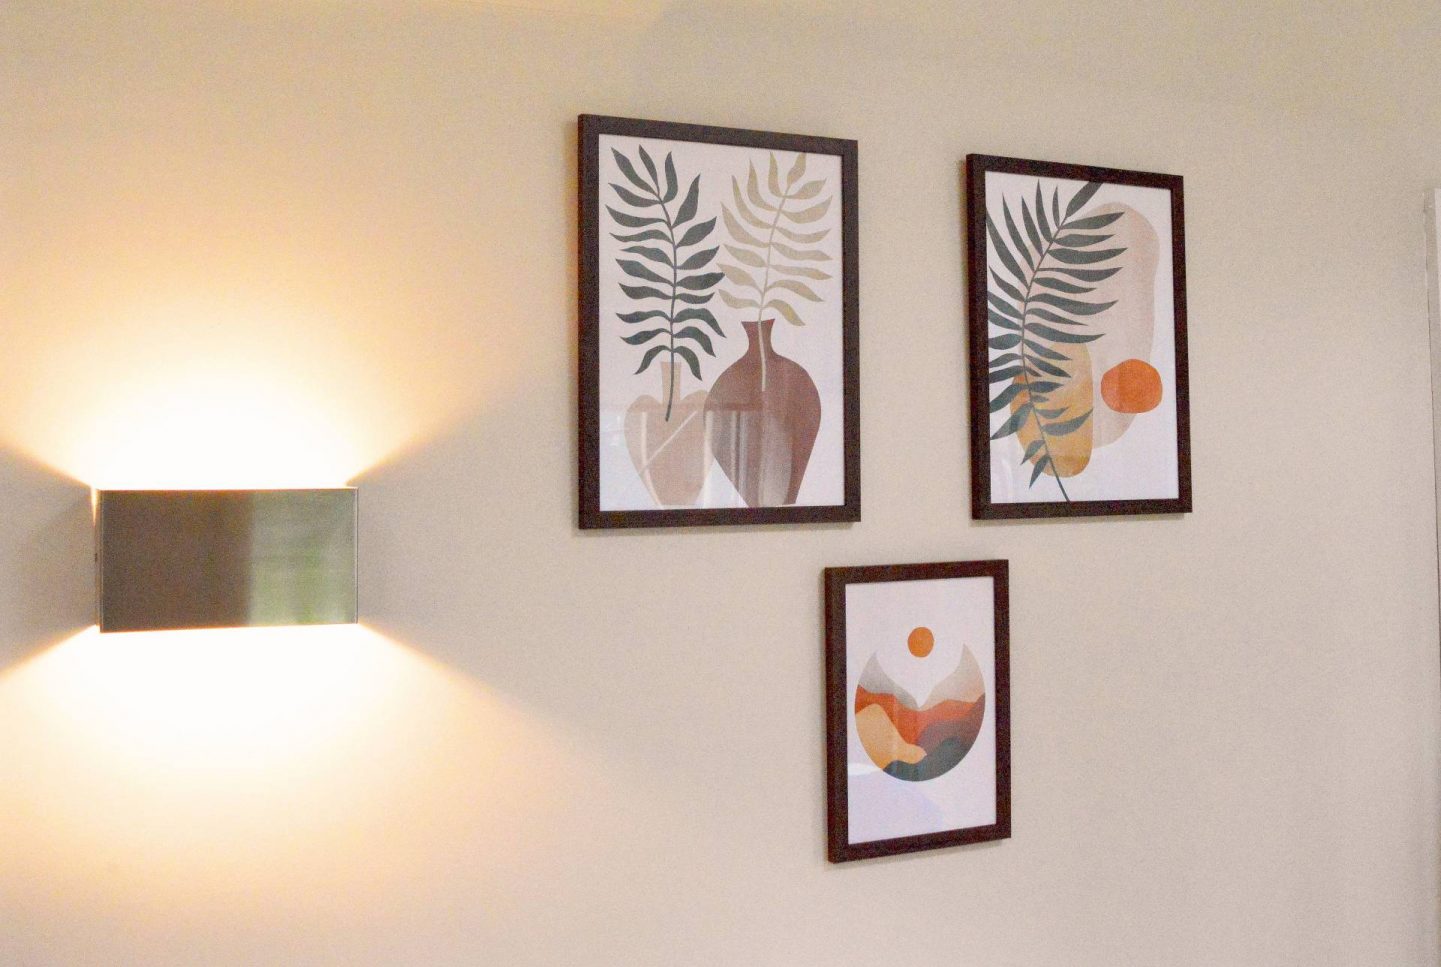 Budget-Friendly Wall Art to Transform Your Home, Poster Store abstract plant prints